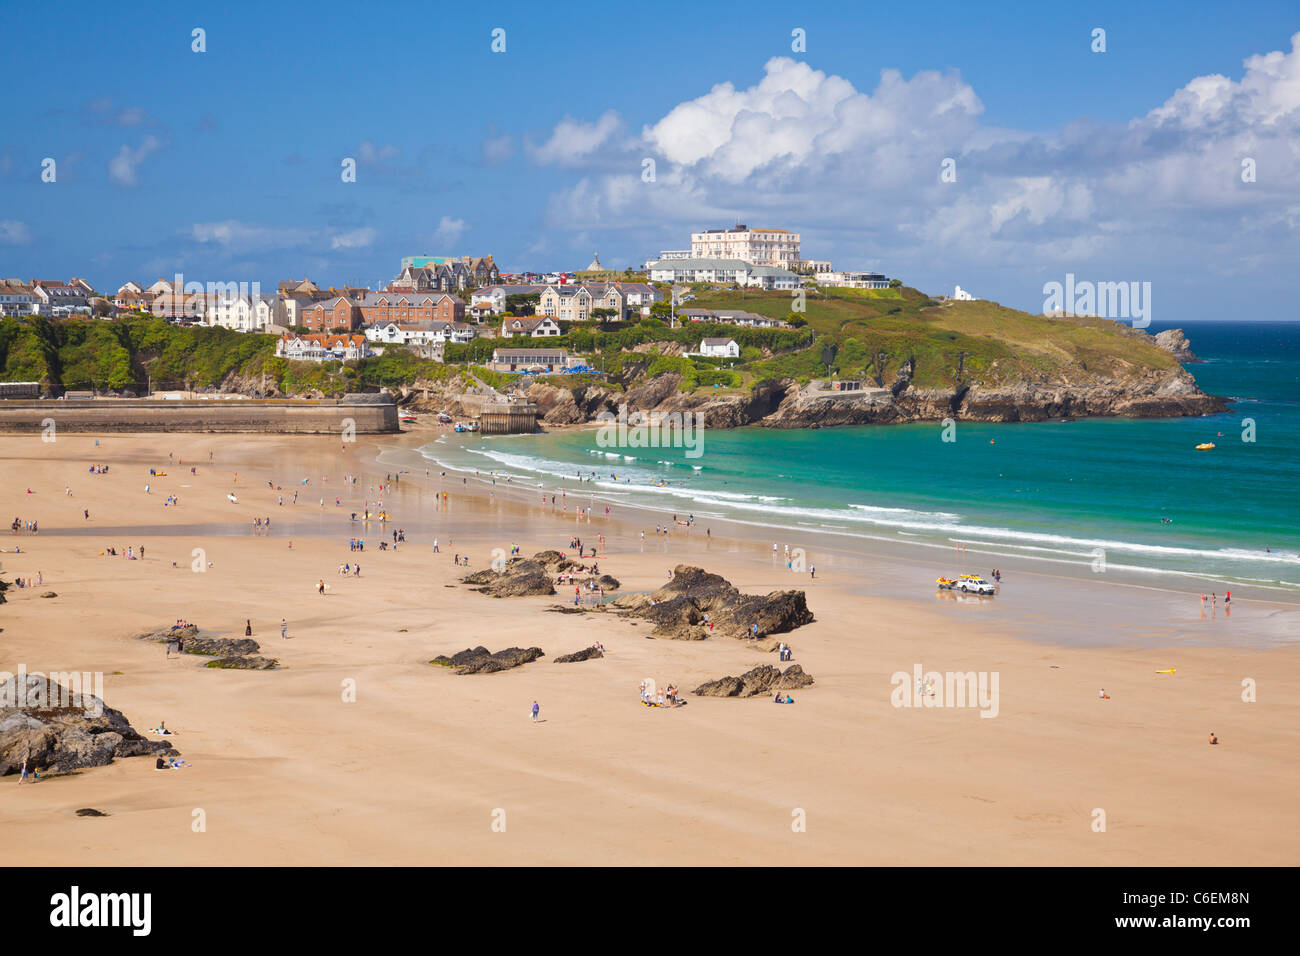 holidaymakers and surfers on the beach at Newquay, Cornwall, England, GB, UK, EU, Europe Stock Photo